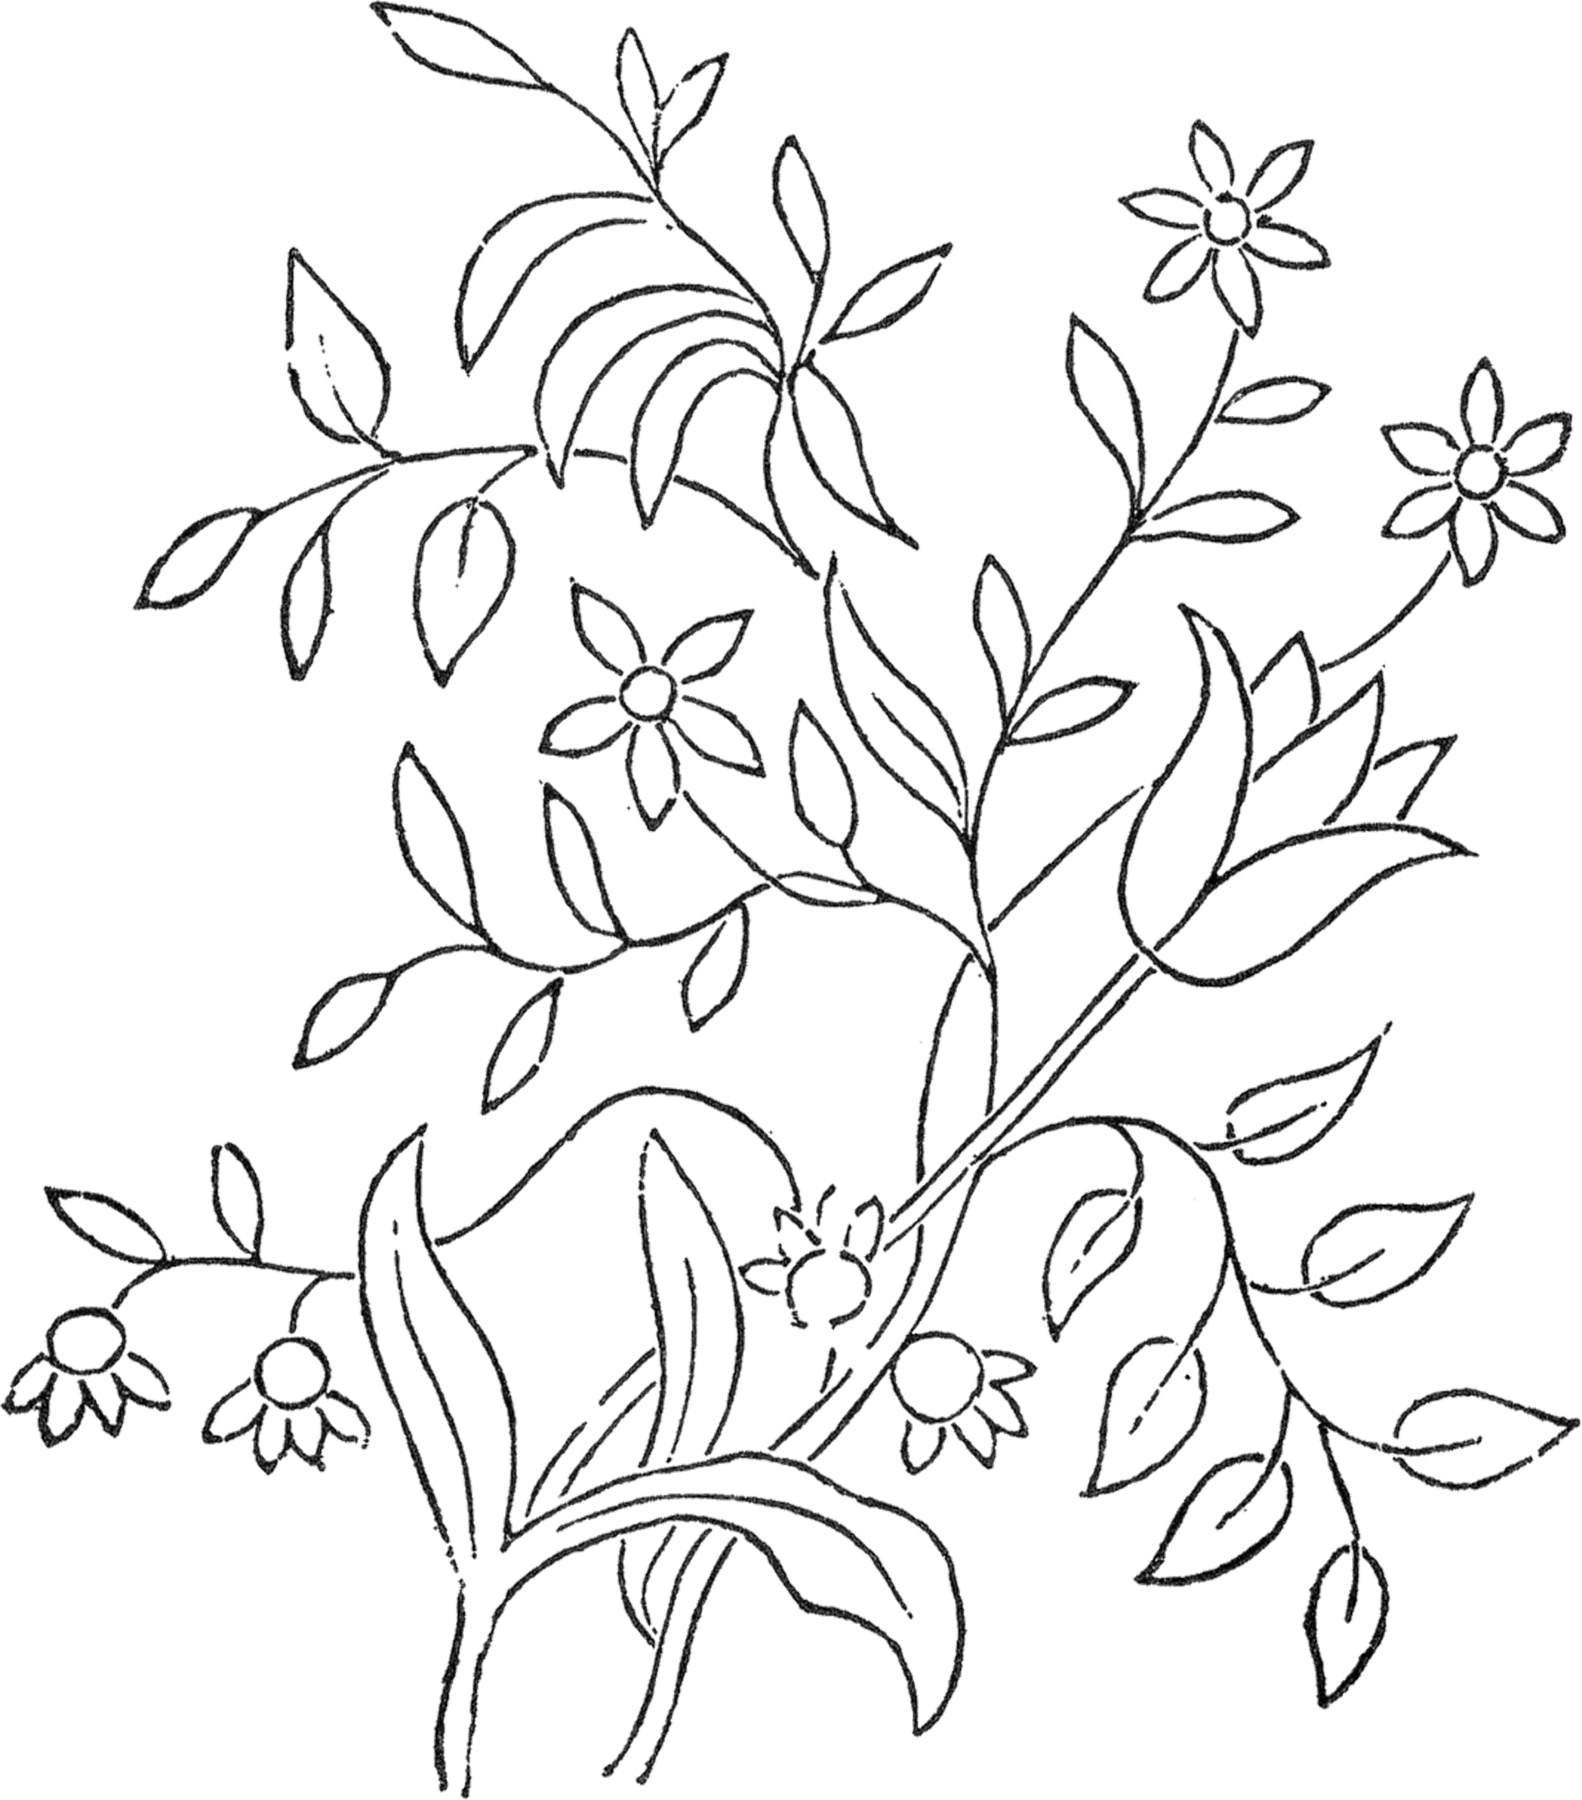 Flower Embroidery Pattern The Graphics Fairy